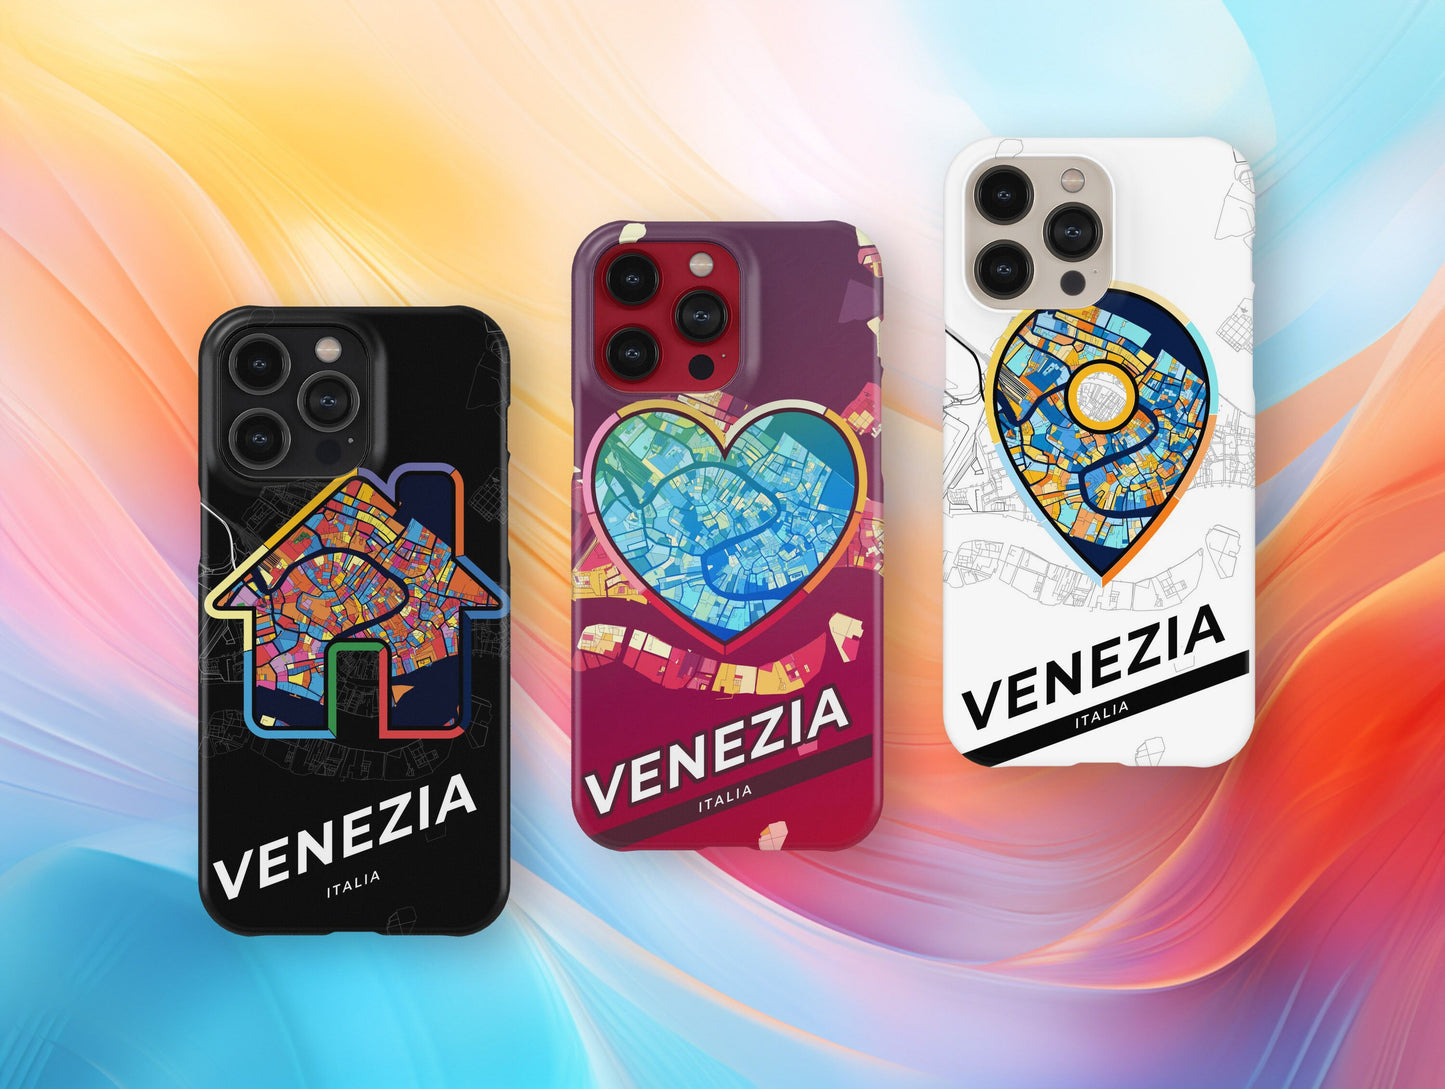 Venice Italy slim phone case with colorful icon